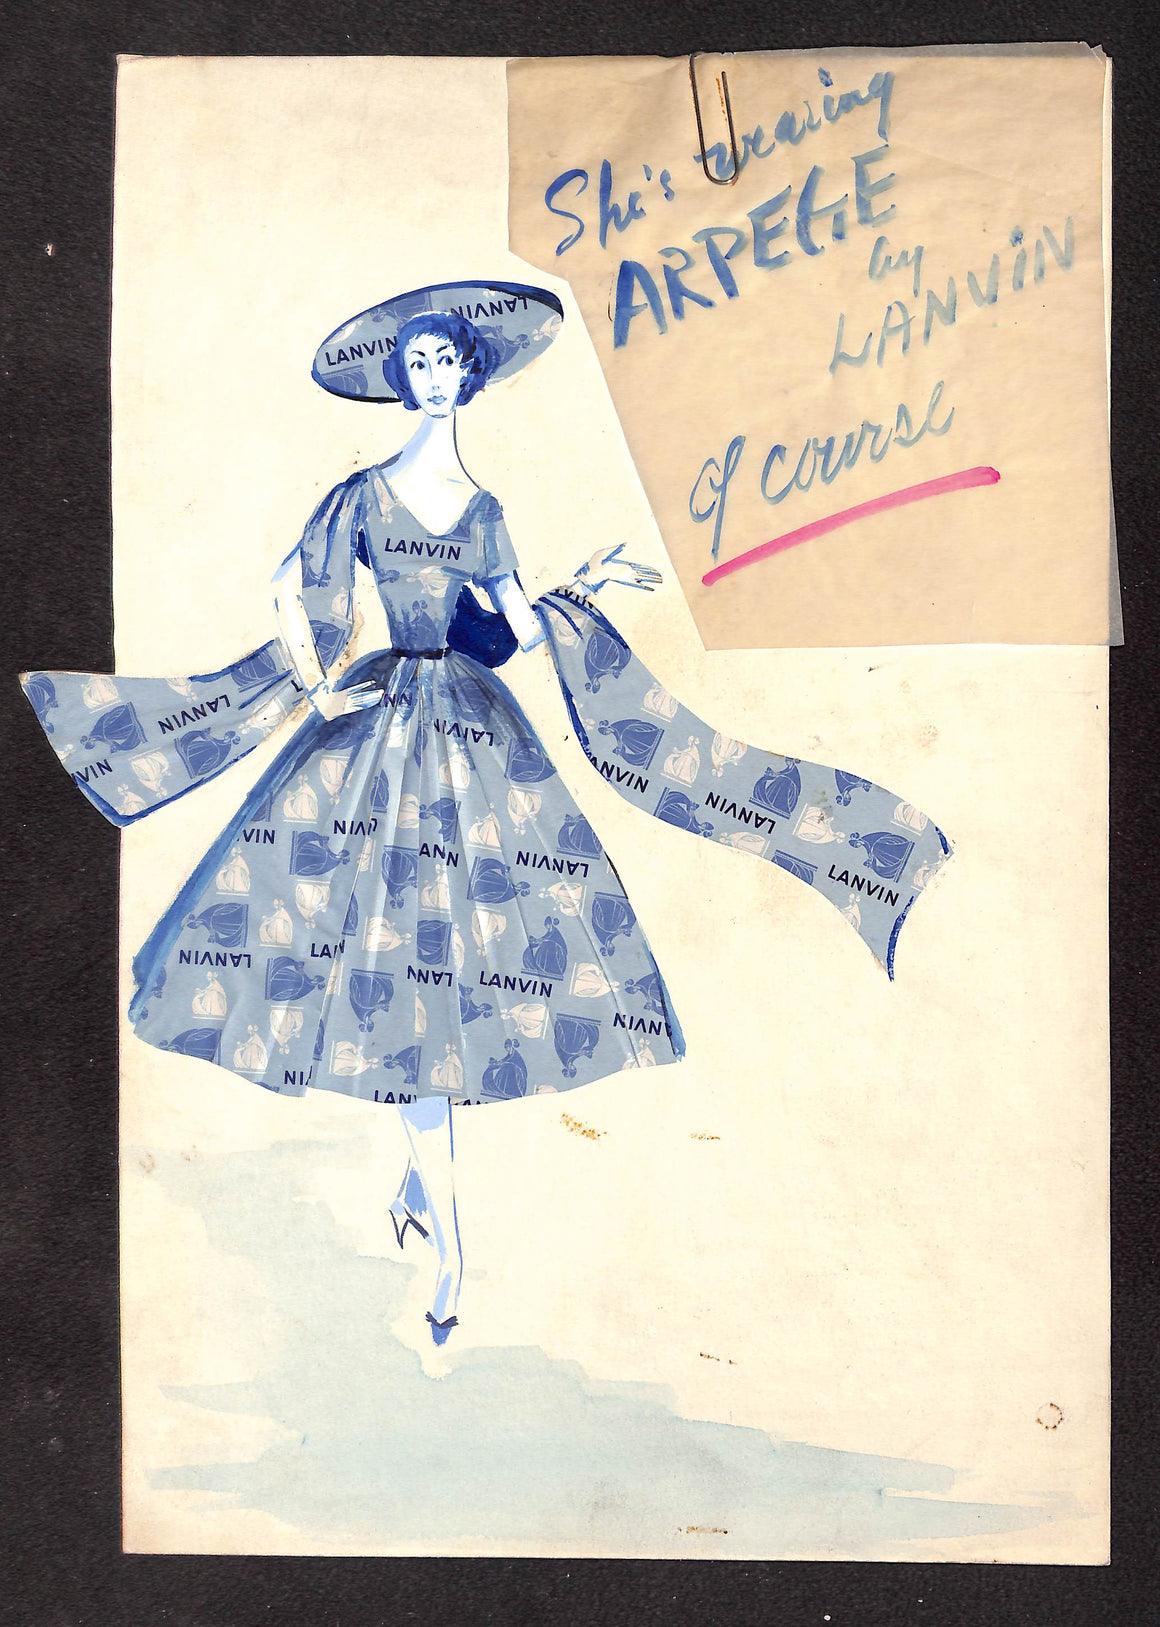 Shes Wearing Arpege By Lanvin Of Course Advertising c1950s Artwork